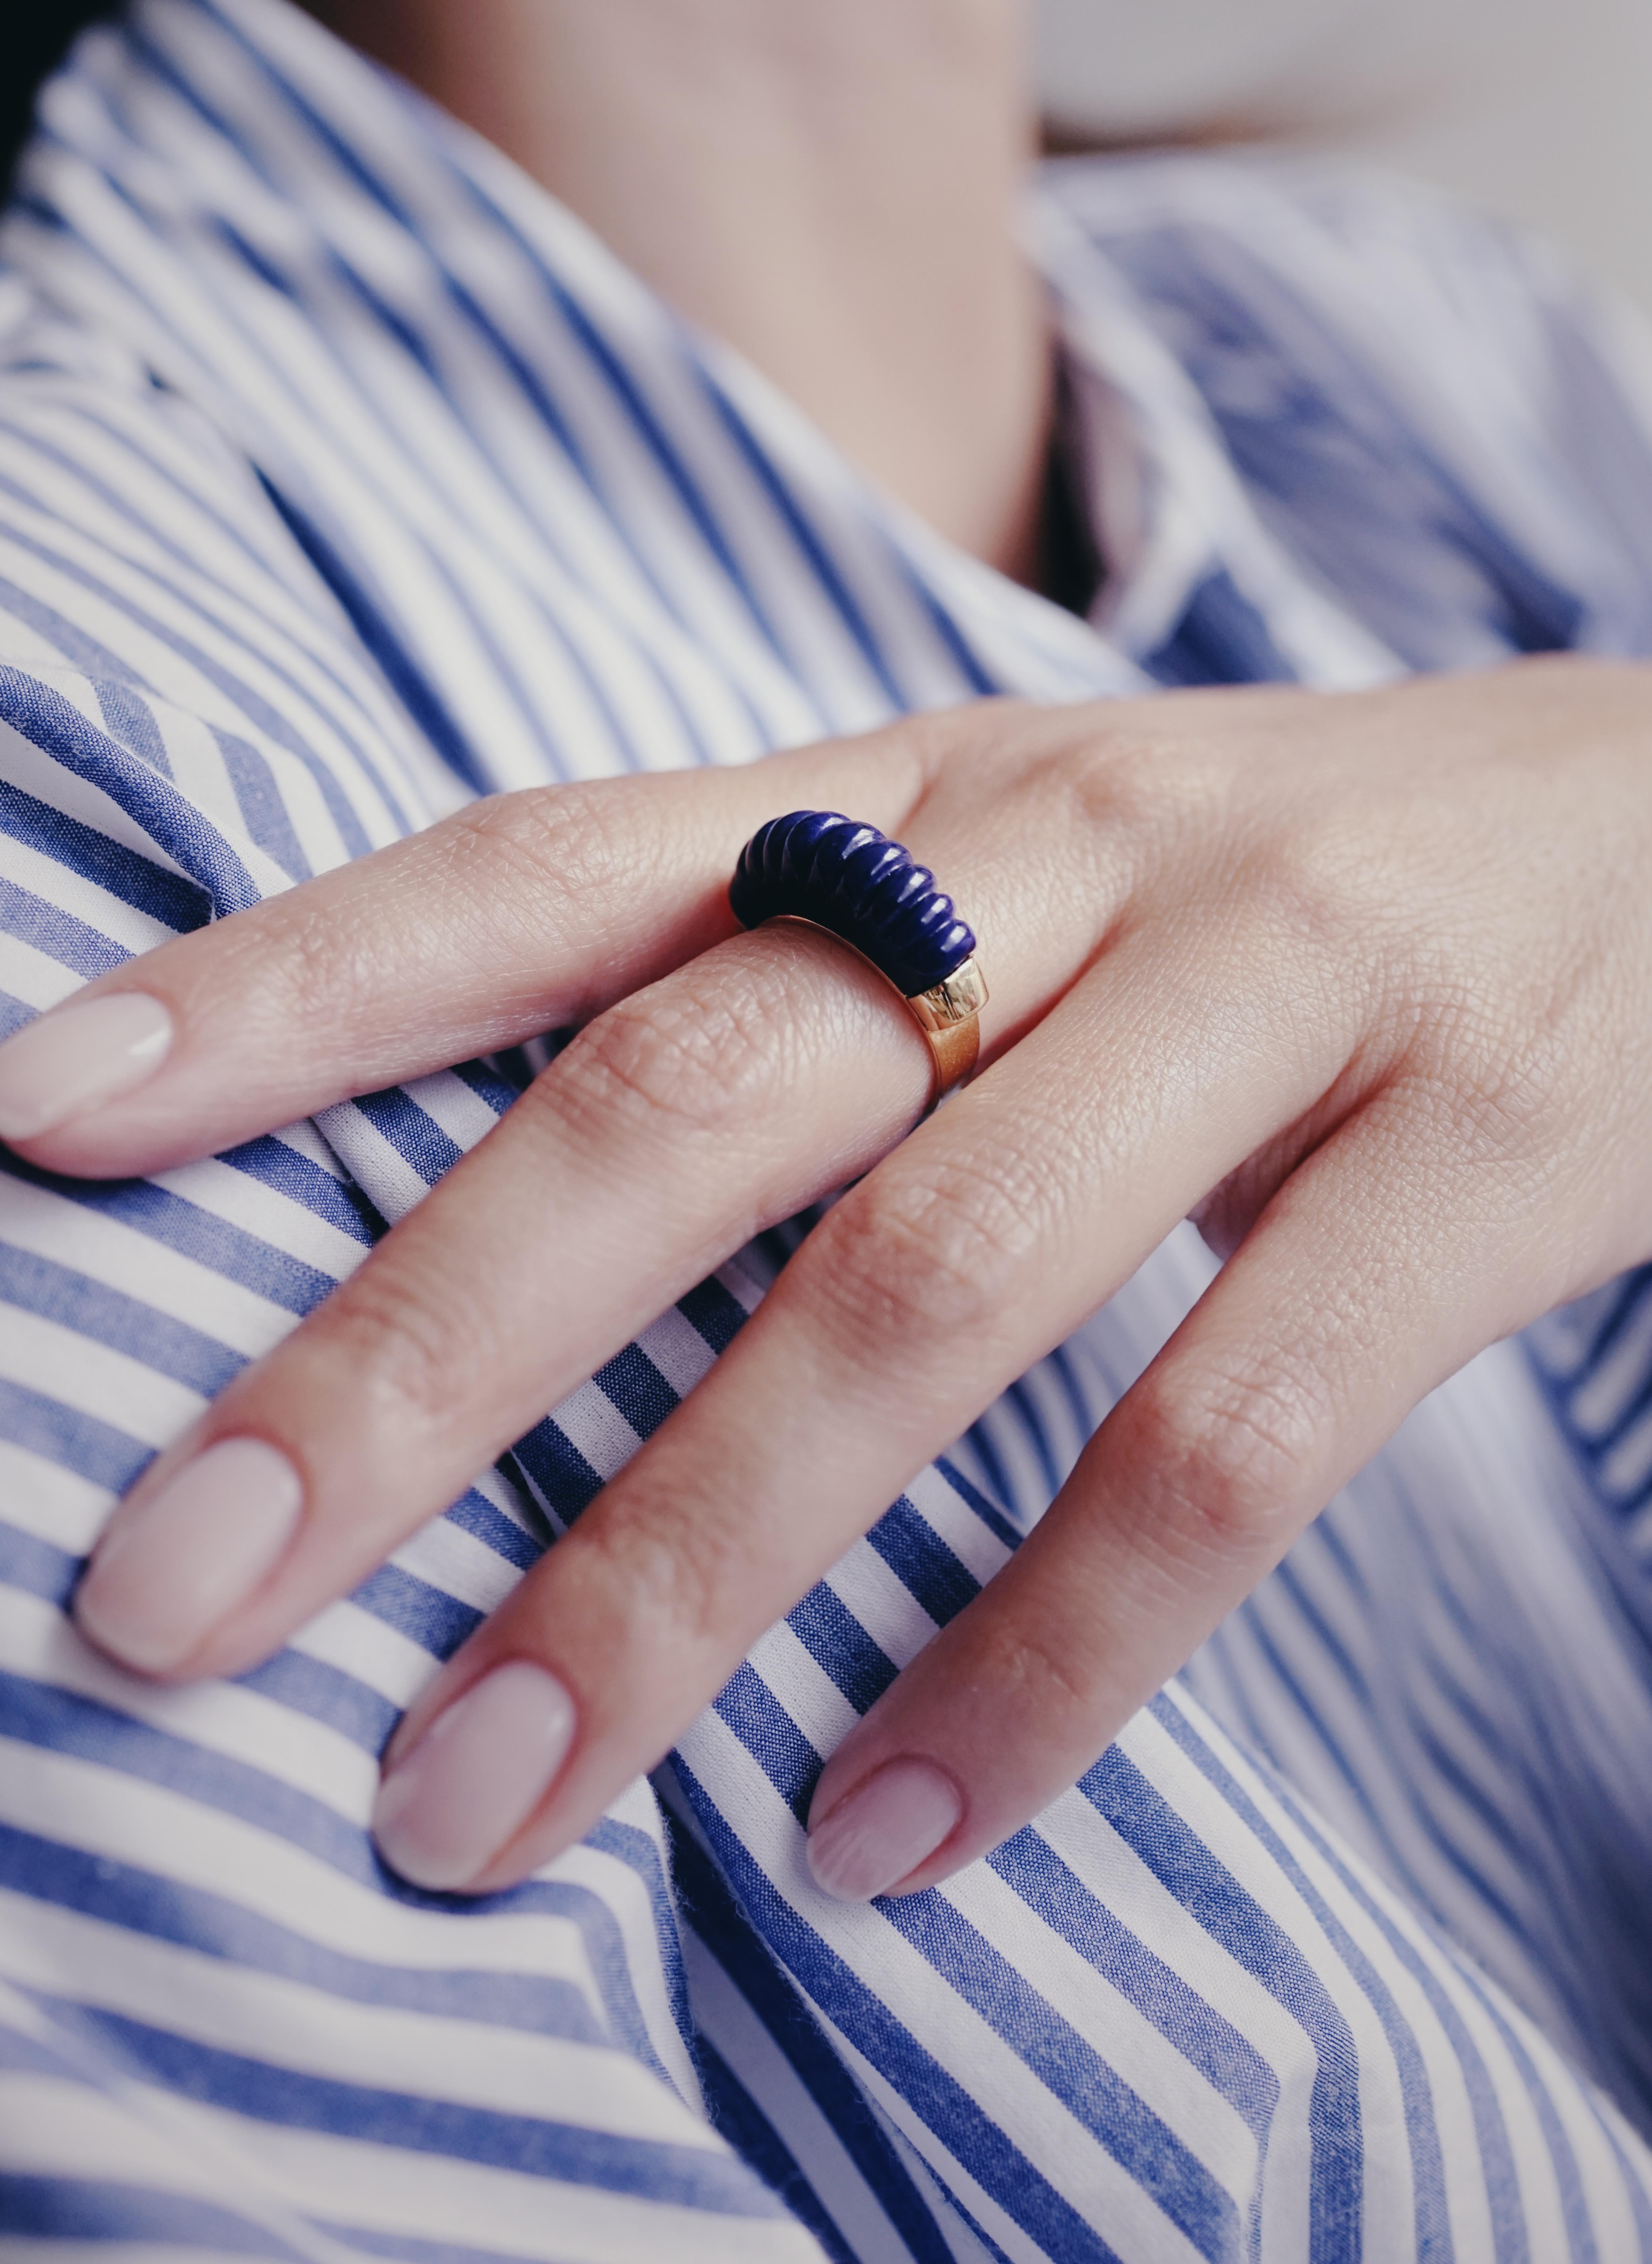 Van Cleef & Arpels, Paris
Beautiful Lapis Lazuli and 18k Gold ring, Circa 1970
Of Godrons design, the ring is a fiercely modern work by one of the most important Van Cleef workshop in Paris in the 1950 to 1970s, Pery & Fils.
Signed VCA and numbered.